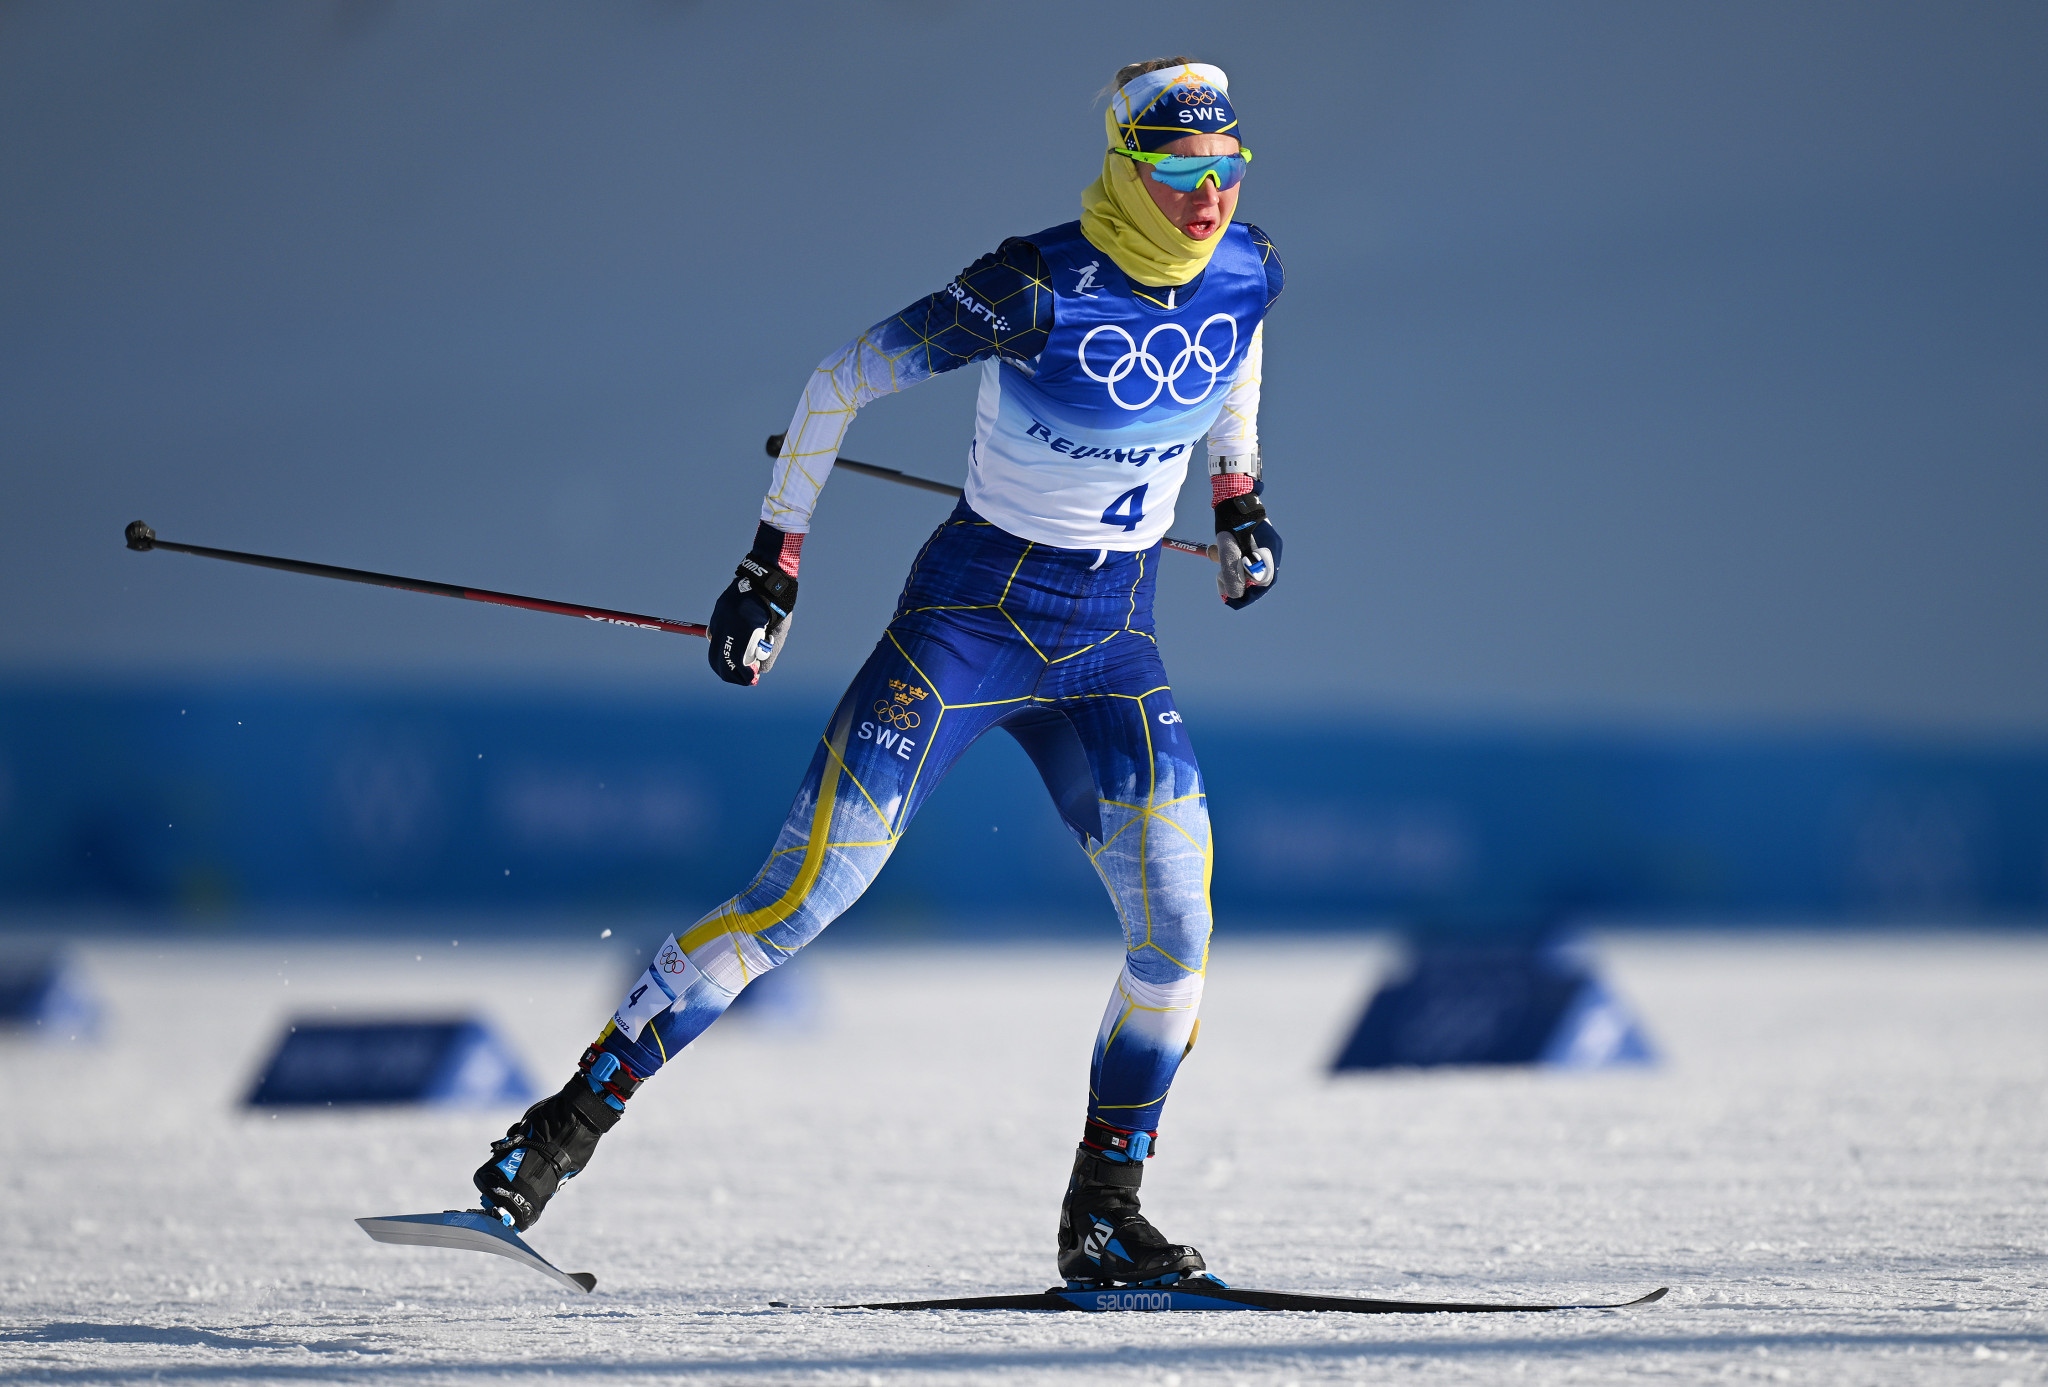 Maja Dahlqvist was one of numerous top Swedish cross-country skiers to threaten to boycott the 2023 Nordic World Ski Championships ©Getty Images